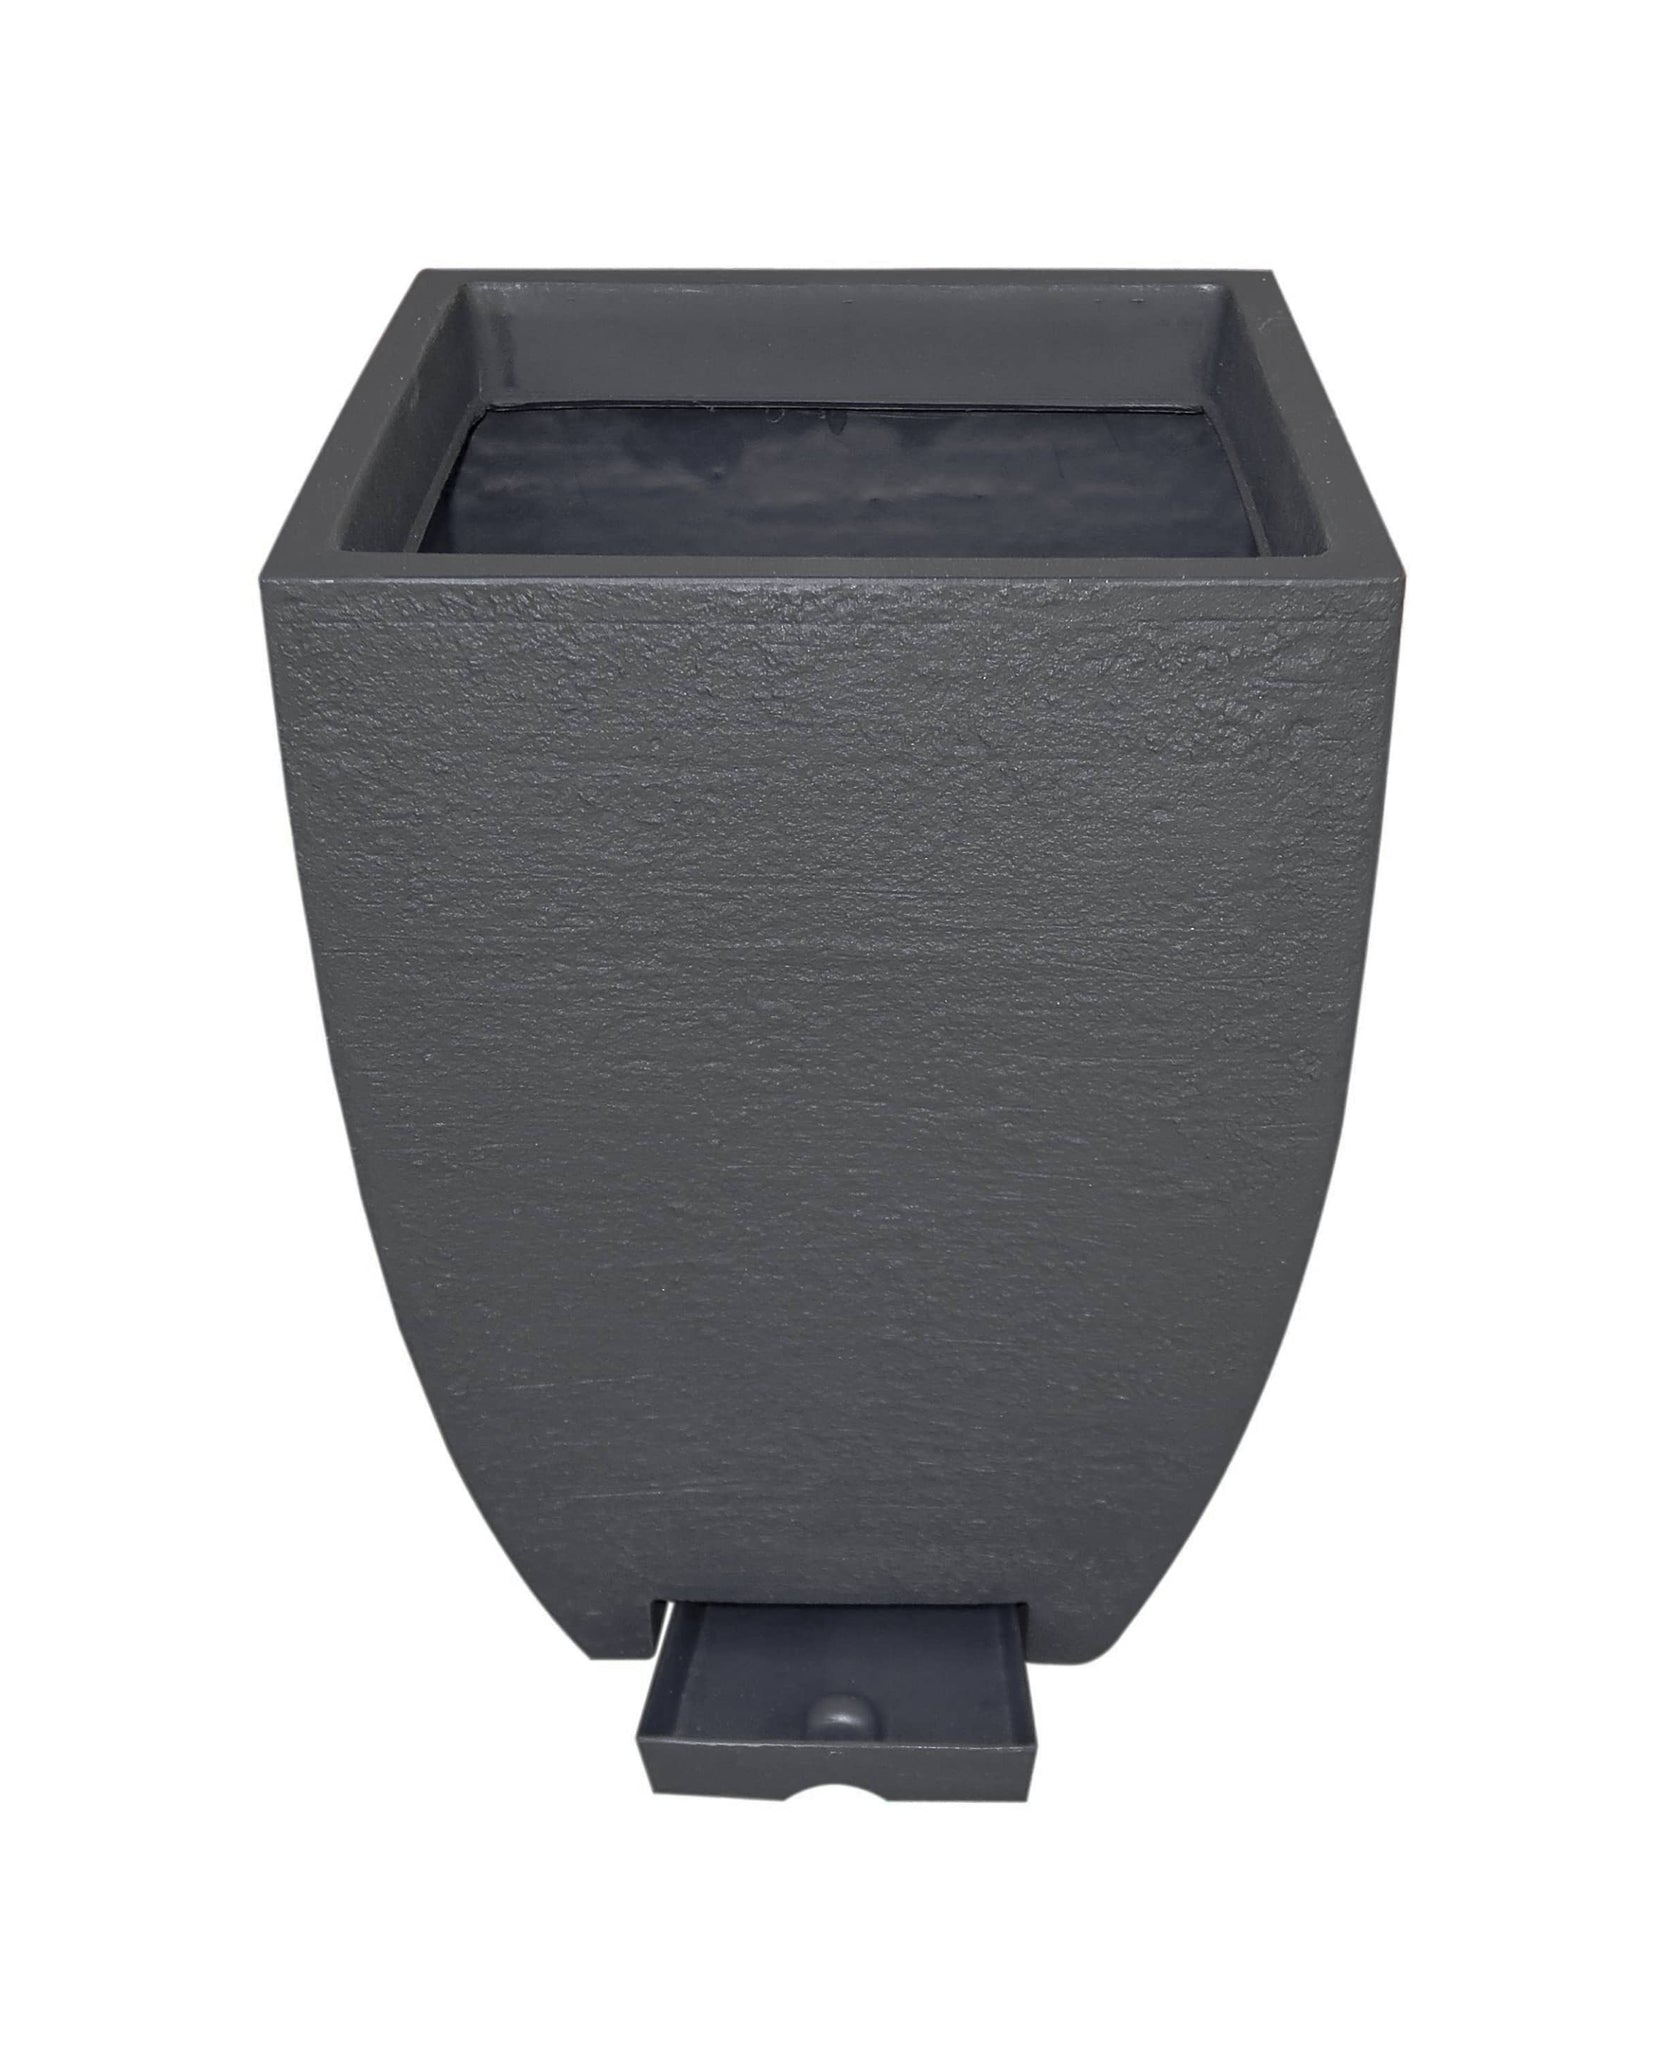 Modern square uptight planter with removable drip tray. Ideal for use indoors or on a patio. Colour Lead (black)